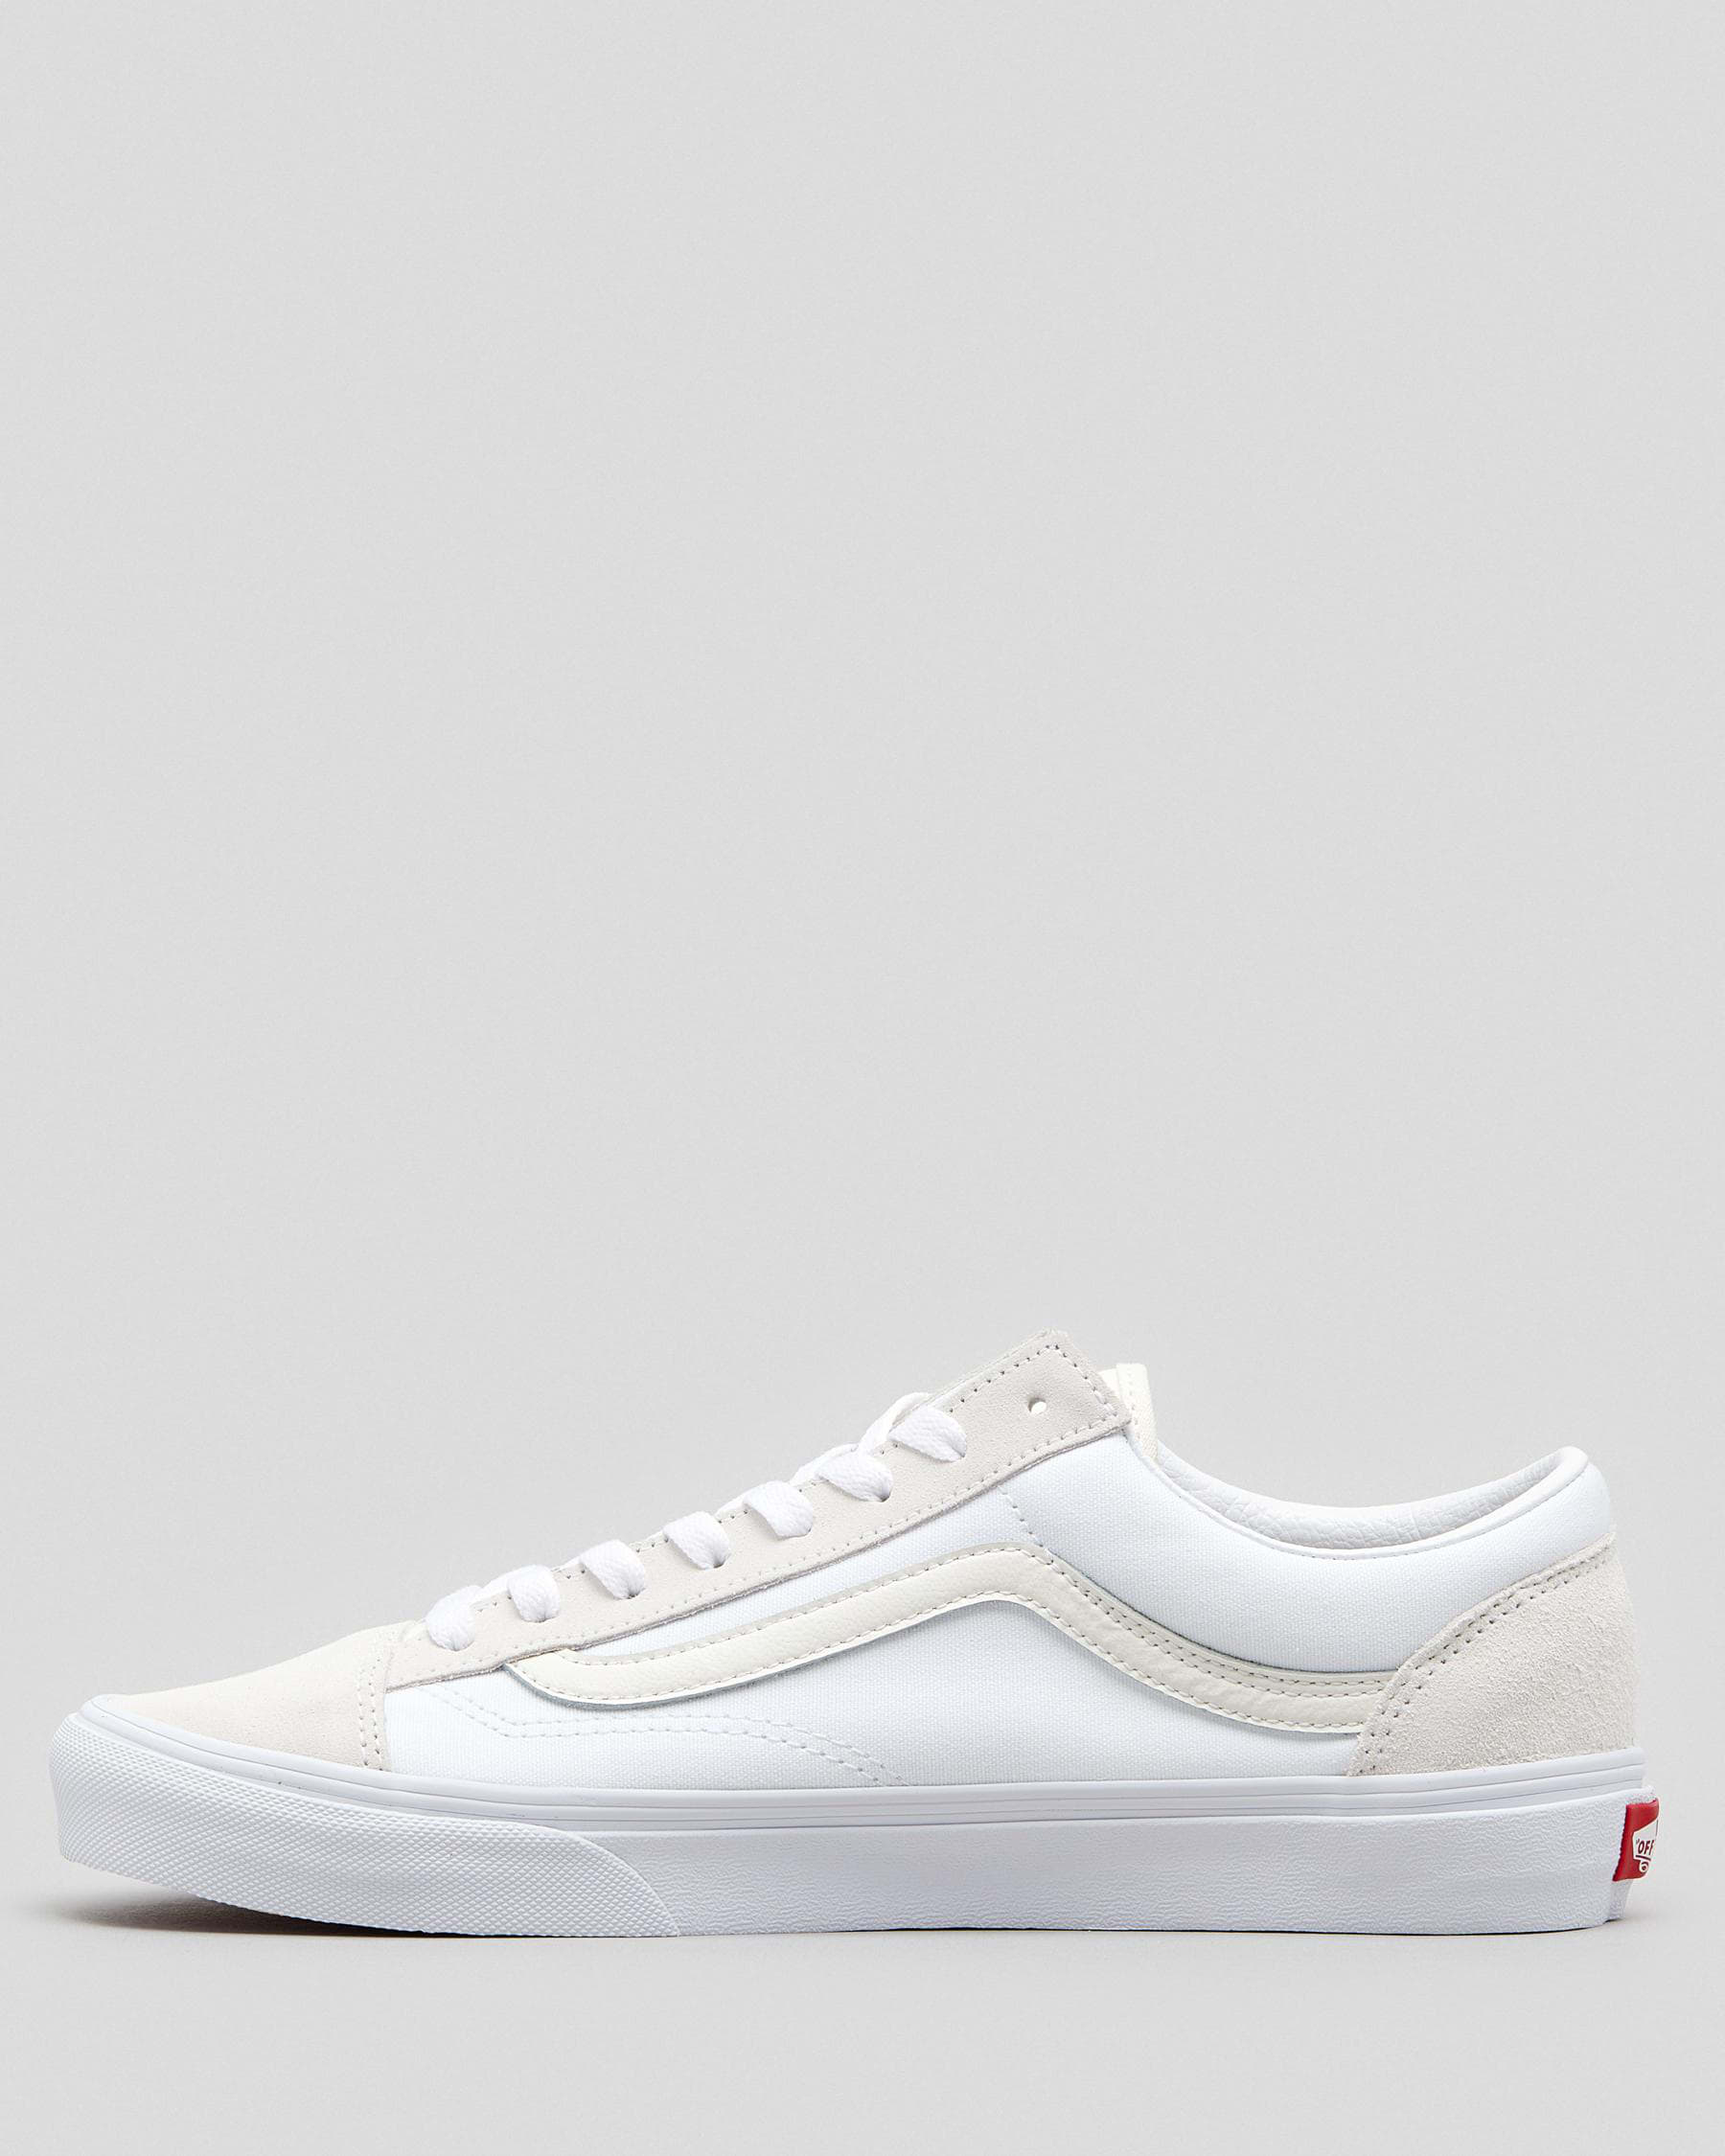 Shop Vans Style 36 Shoes In Marshmallow/true White - Fast Shipping ...